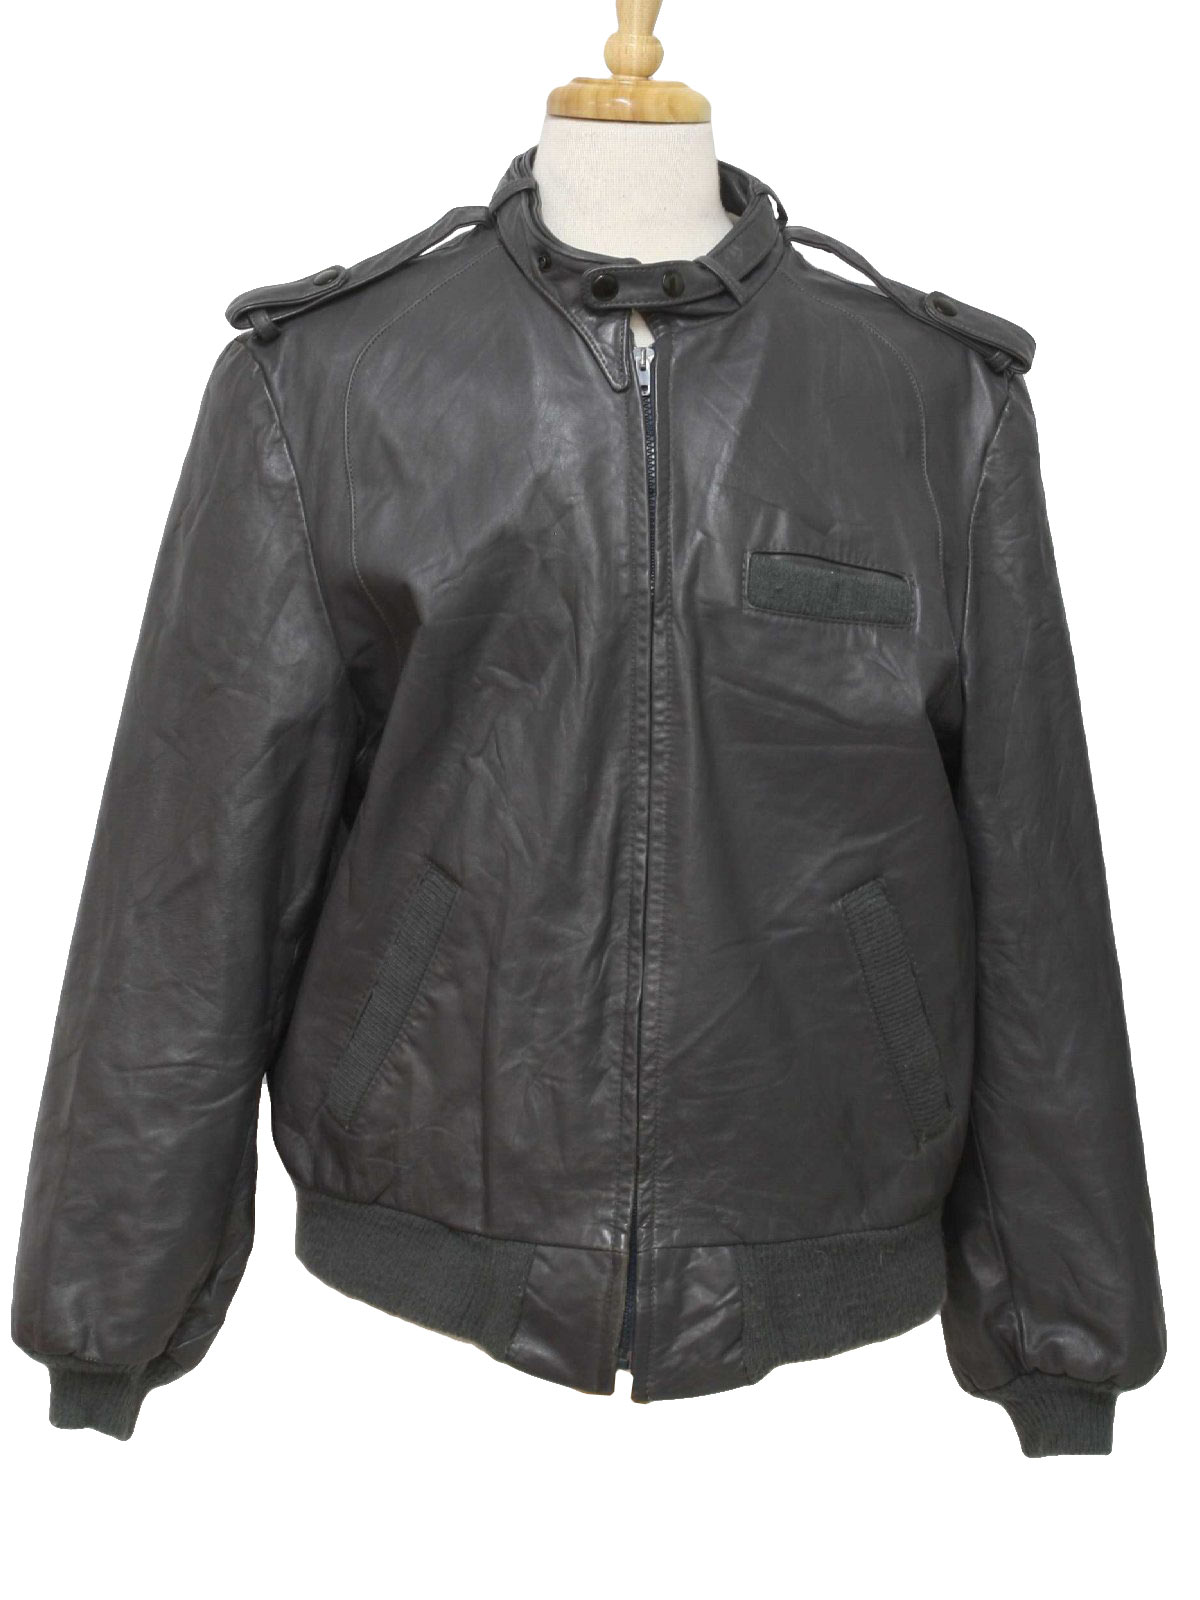 Retro Eighties Leather Jacket: 80s -Michael Charles- Mens grey leather ...